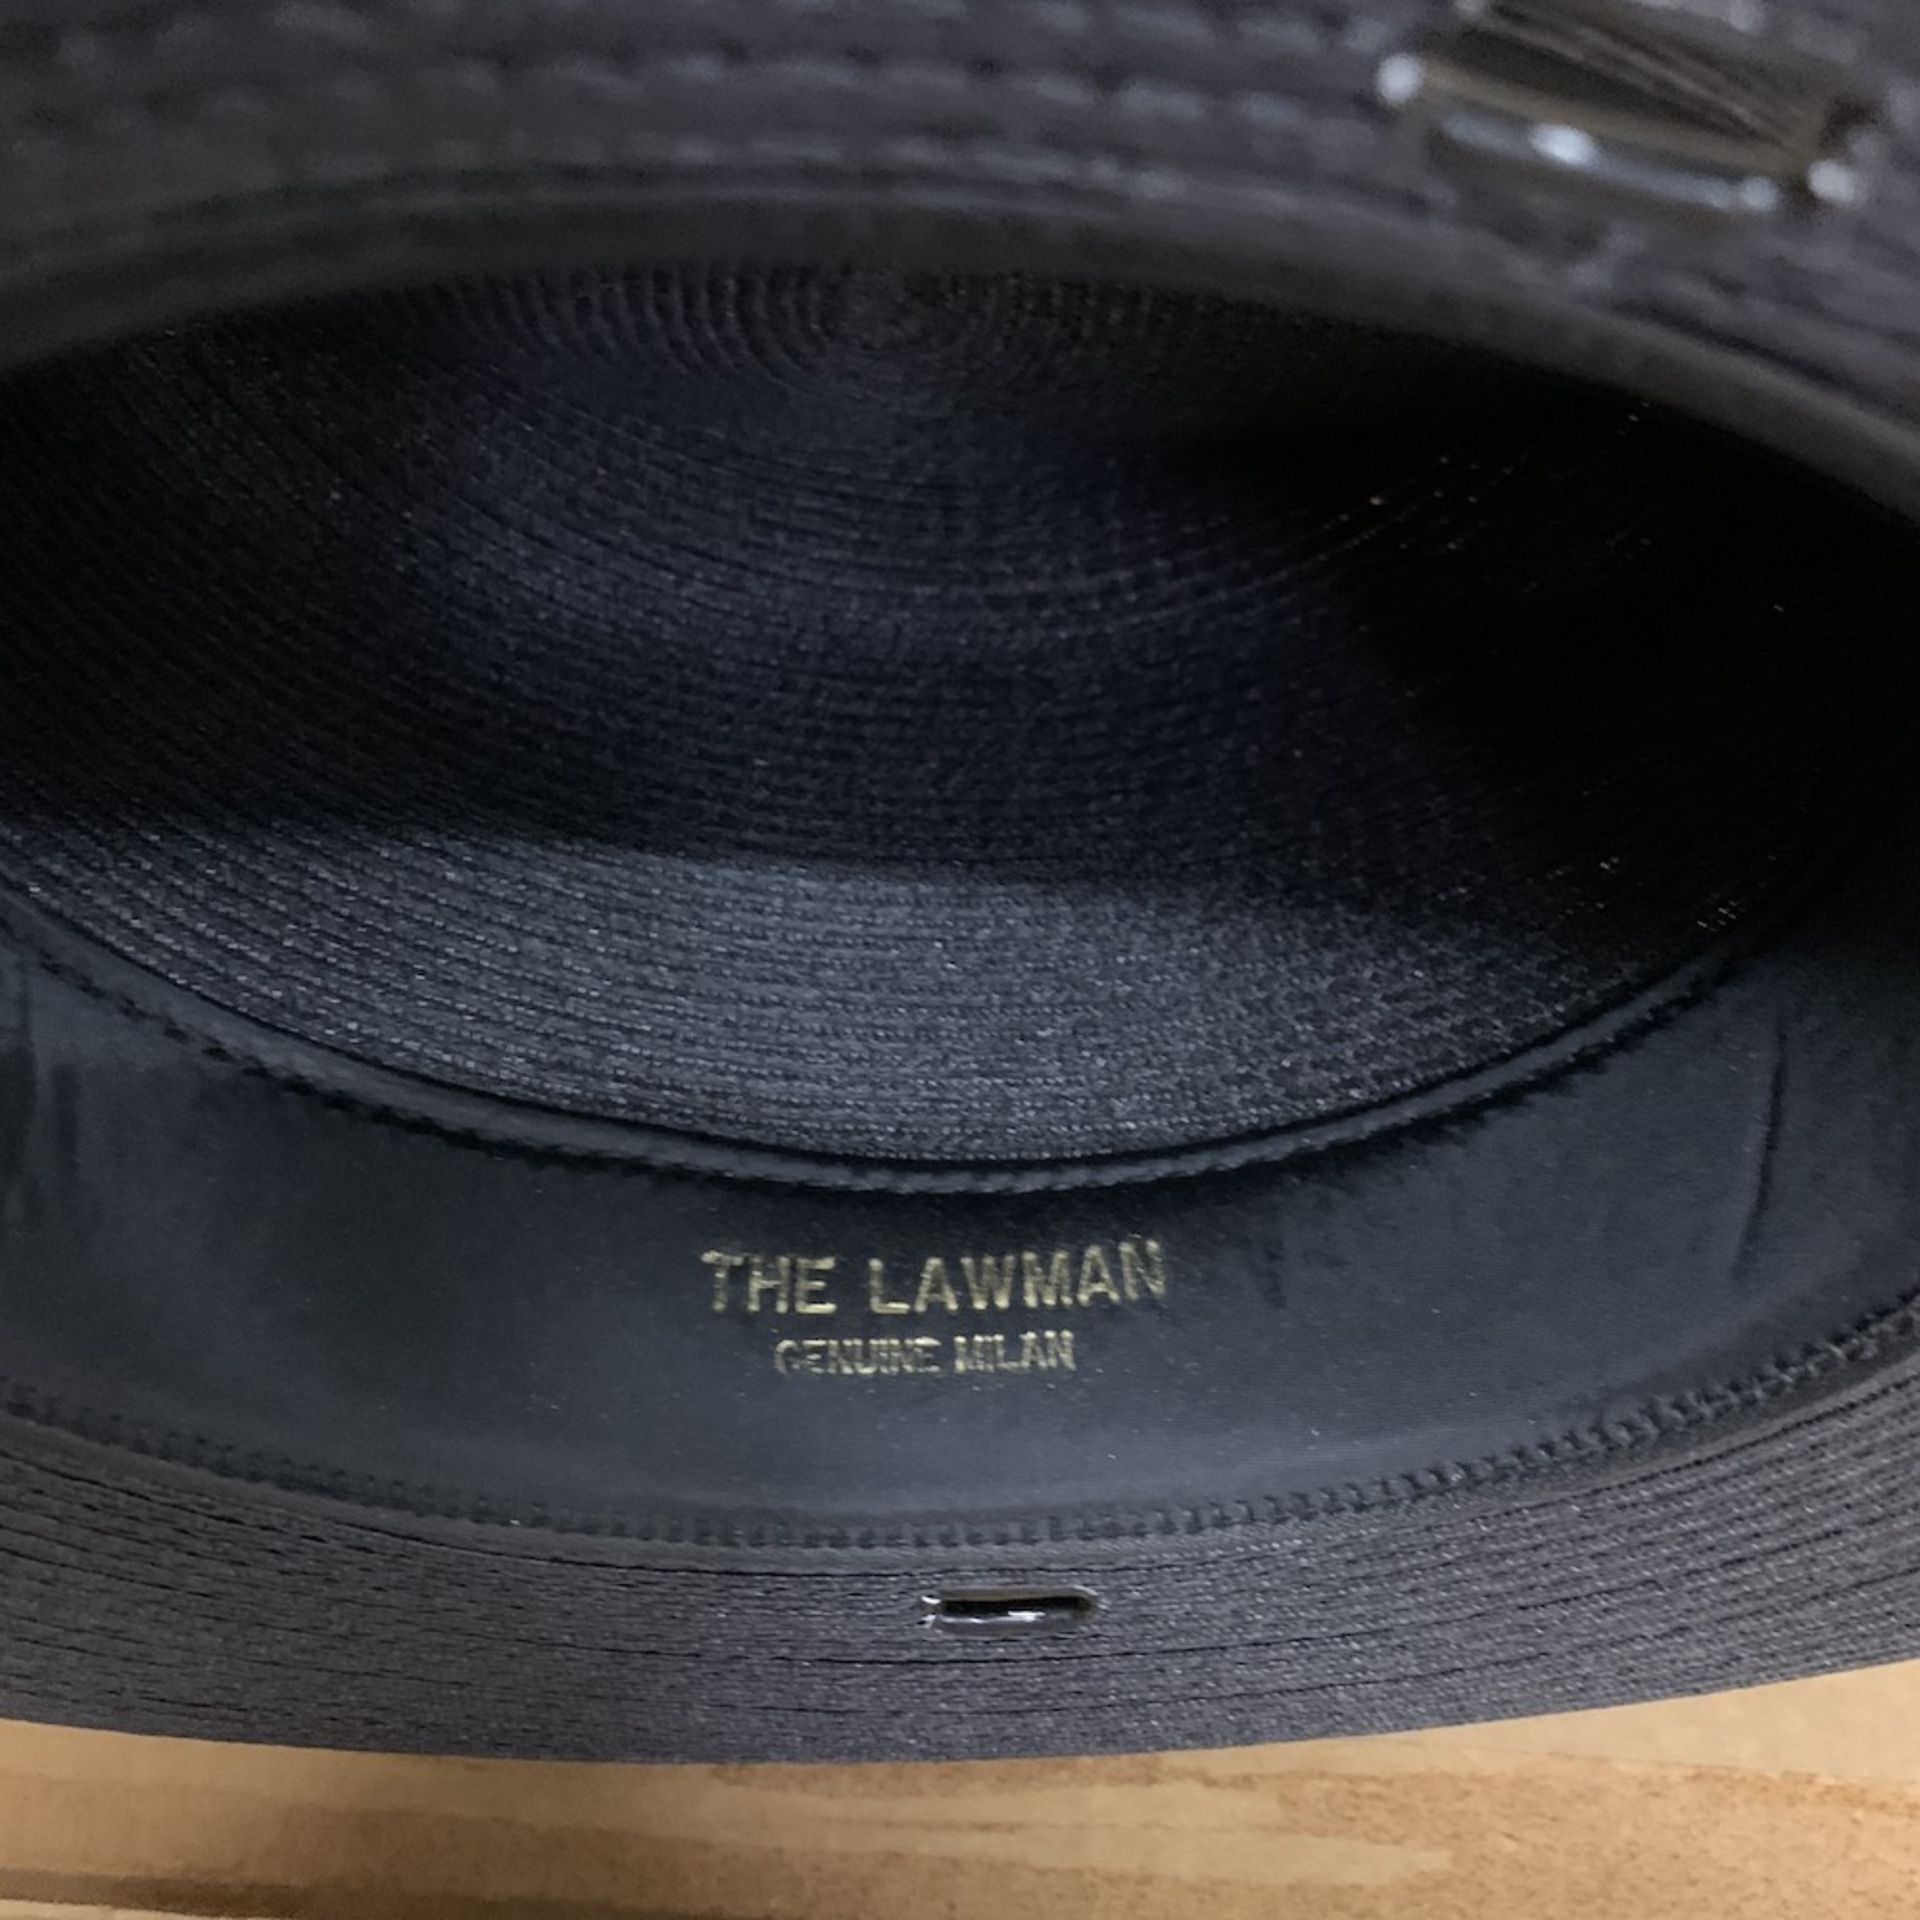 8 Campaign Uniform Hats, Black Straw Double The Lawman, and Flex-3X Beaver Quality, Various Sizes - Image 4 of 8